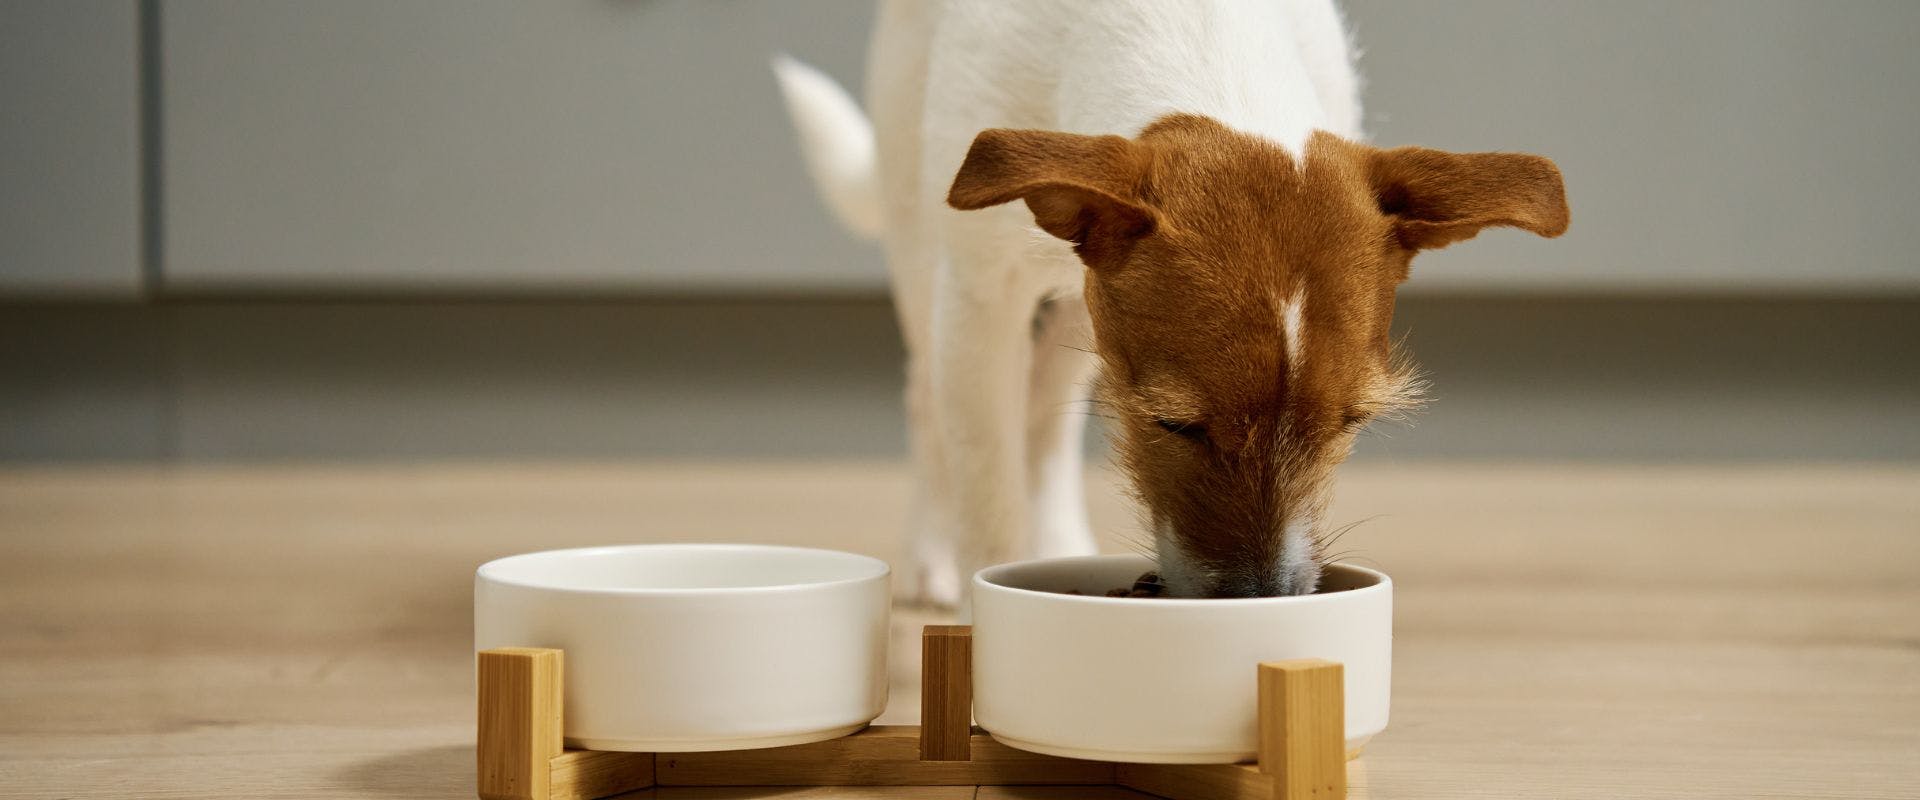 Jack Russell dog eating from a bowl